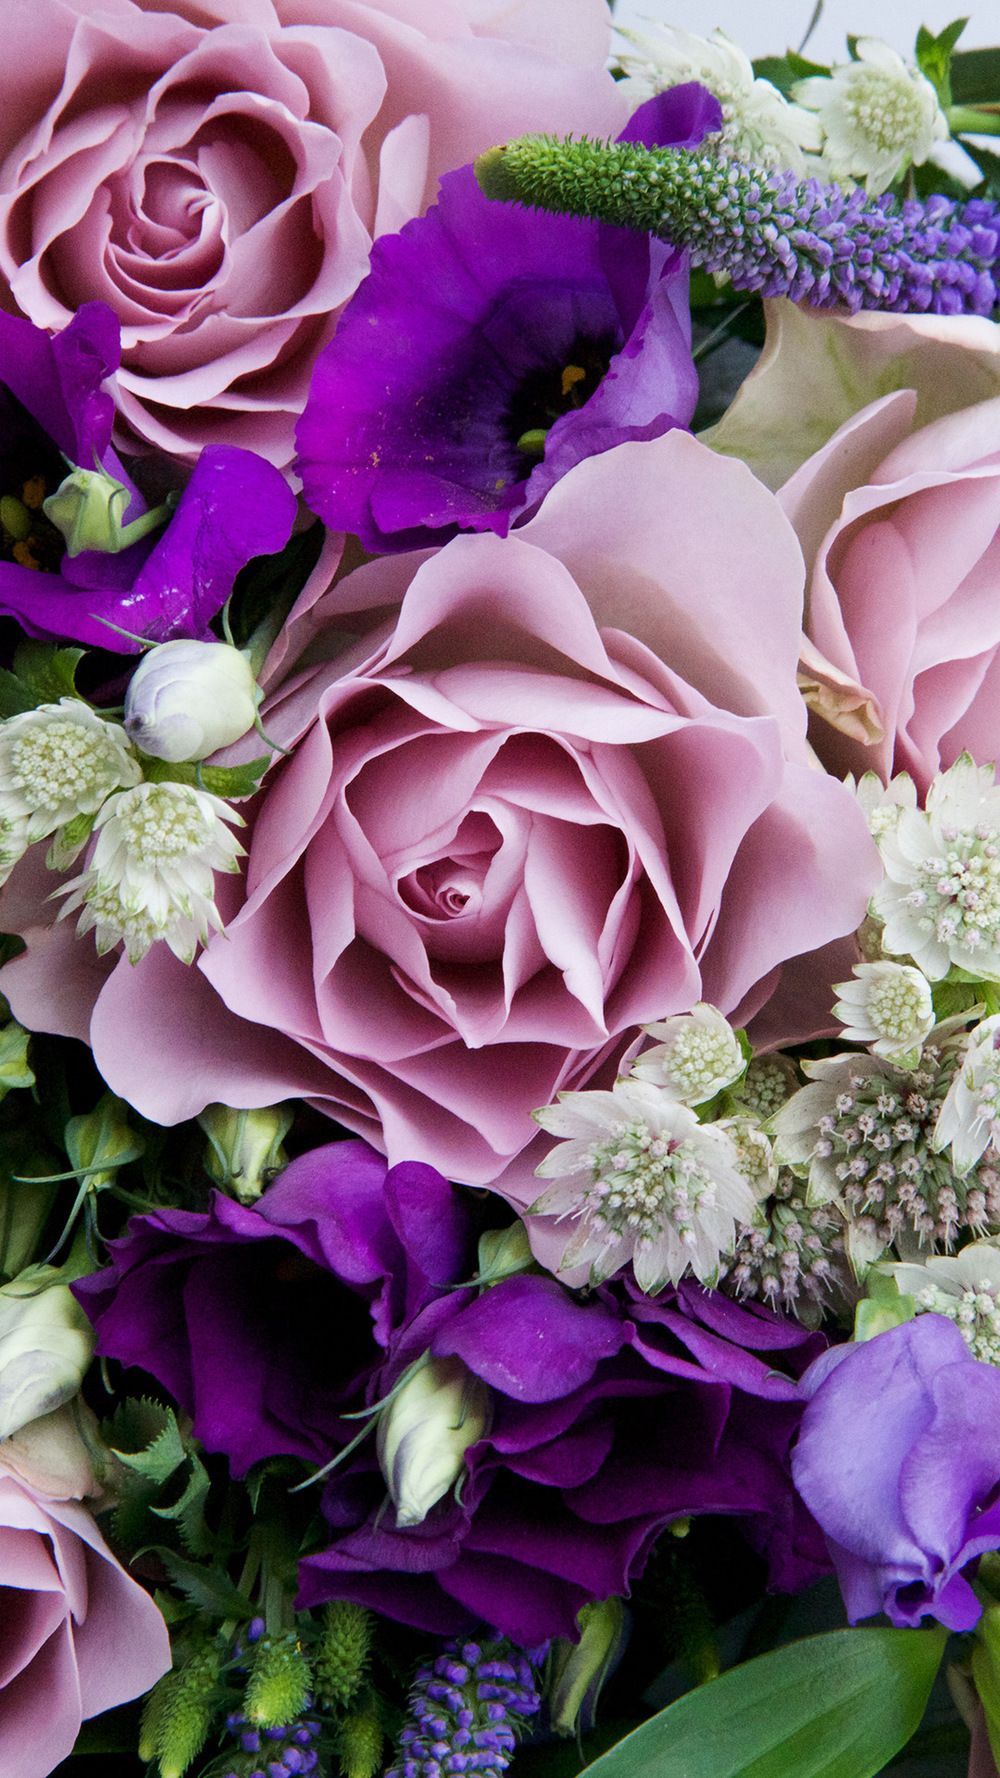 Mother's Day Flowers and Free Phone Wallpaper featuring Debenhams